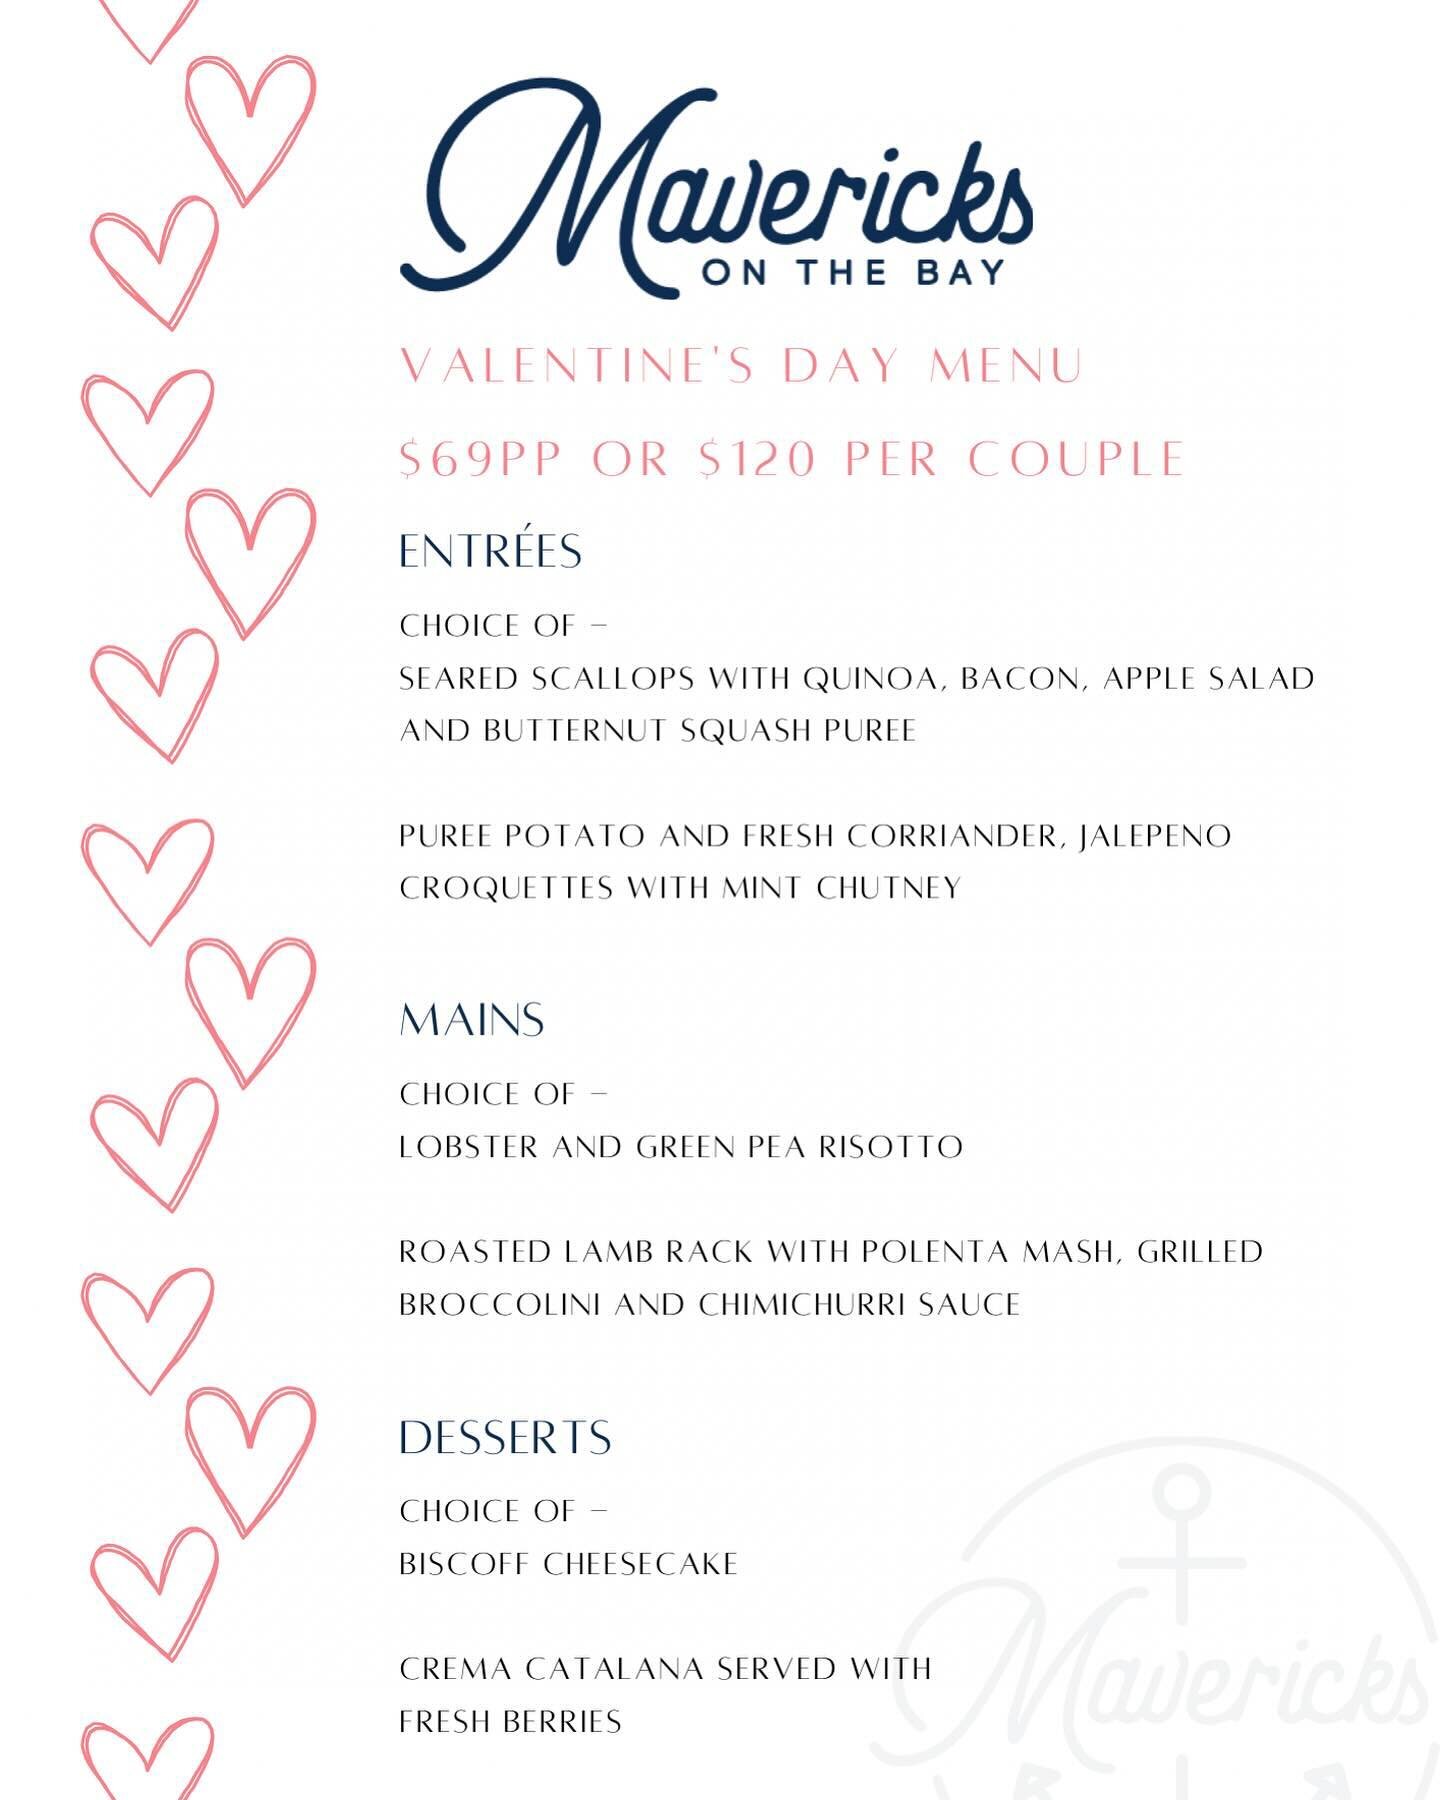 Raise a glass to love and enjoy a romantic Valentine&rsquo;s Day meal with us 🌹❣️

Bookings available for Valentine&rsquo;s Day!
Please email bookings@mavericksonthebay.com.au
Or come in and see our friendly staff to make a reservation😊